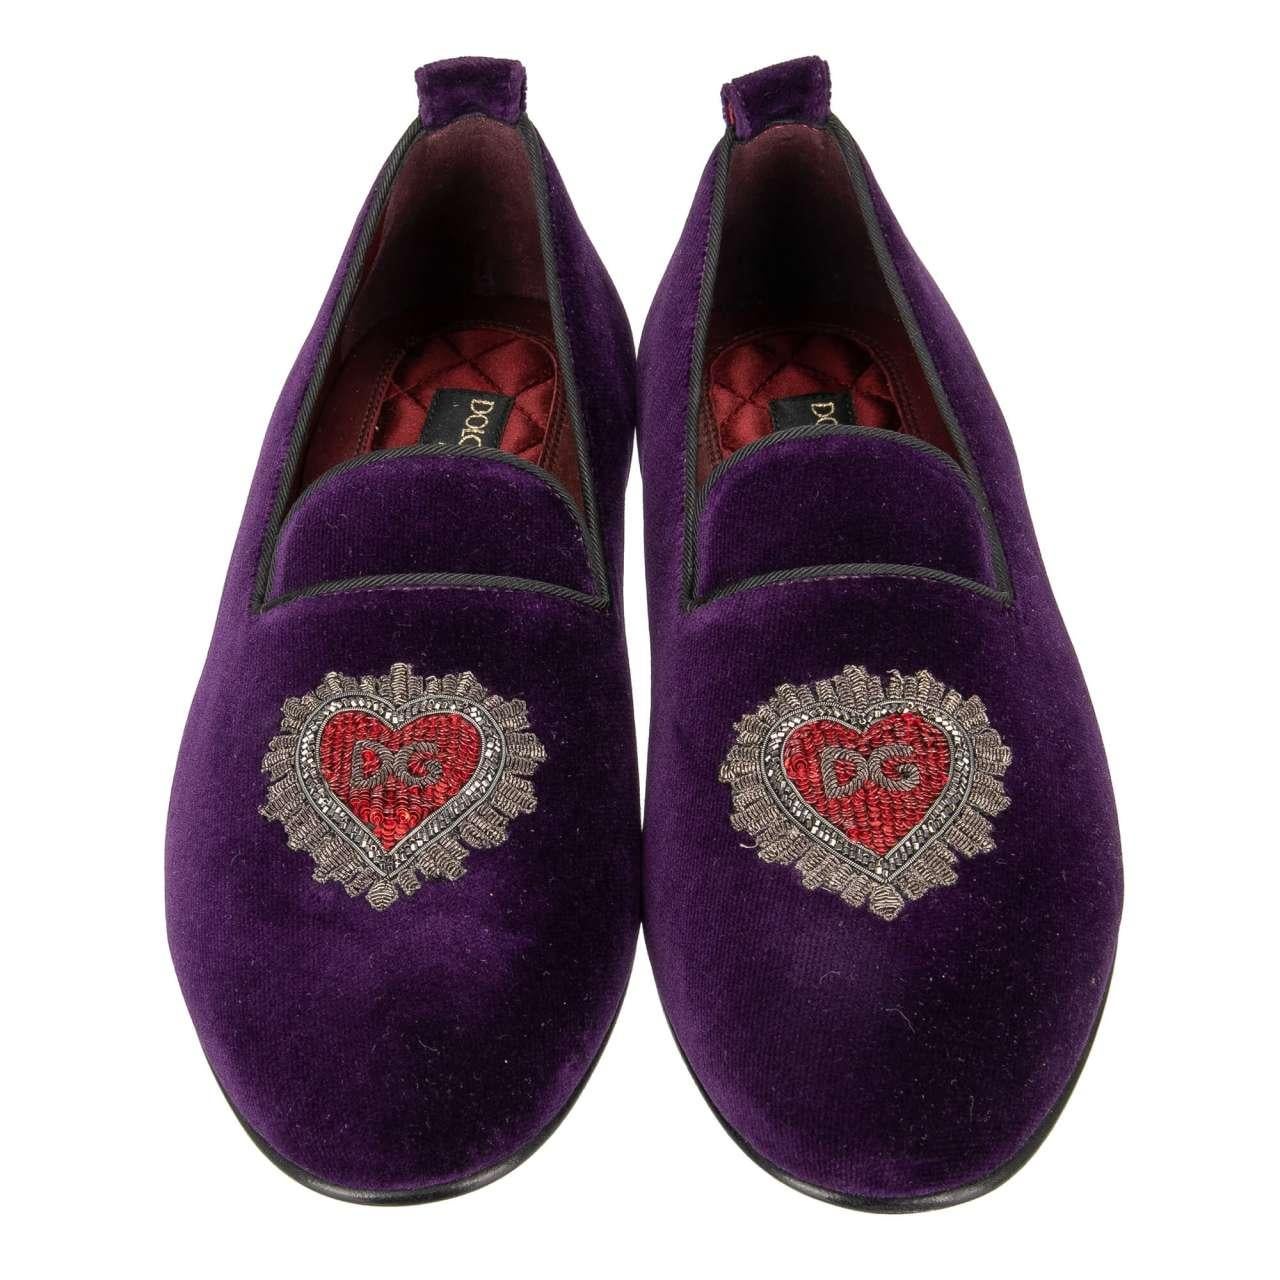 - Velvet loafer shoes YOUNG POPE with sequins embroidered heart and DG logo in purple and red by DOLCE & GABBANA - MADE IN ITALY - Former RRP: EUR 849 - New with Box - Model: A50194-AV635-80459 - Material: 100% Cotton - Sole: Leather - Color: Purple